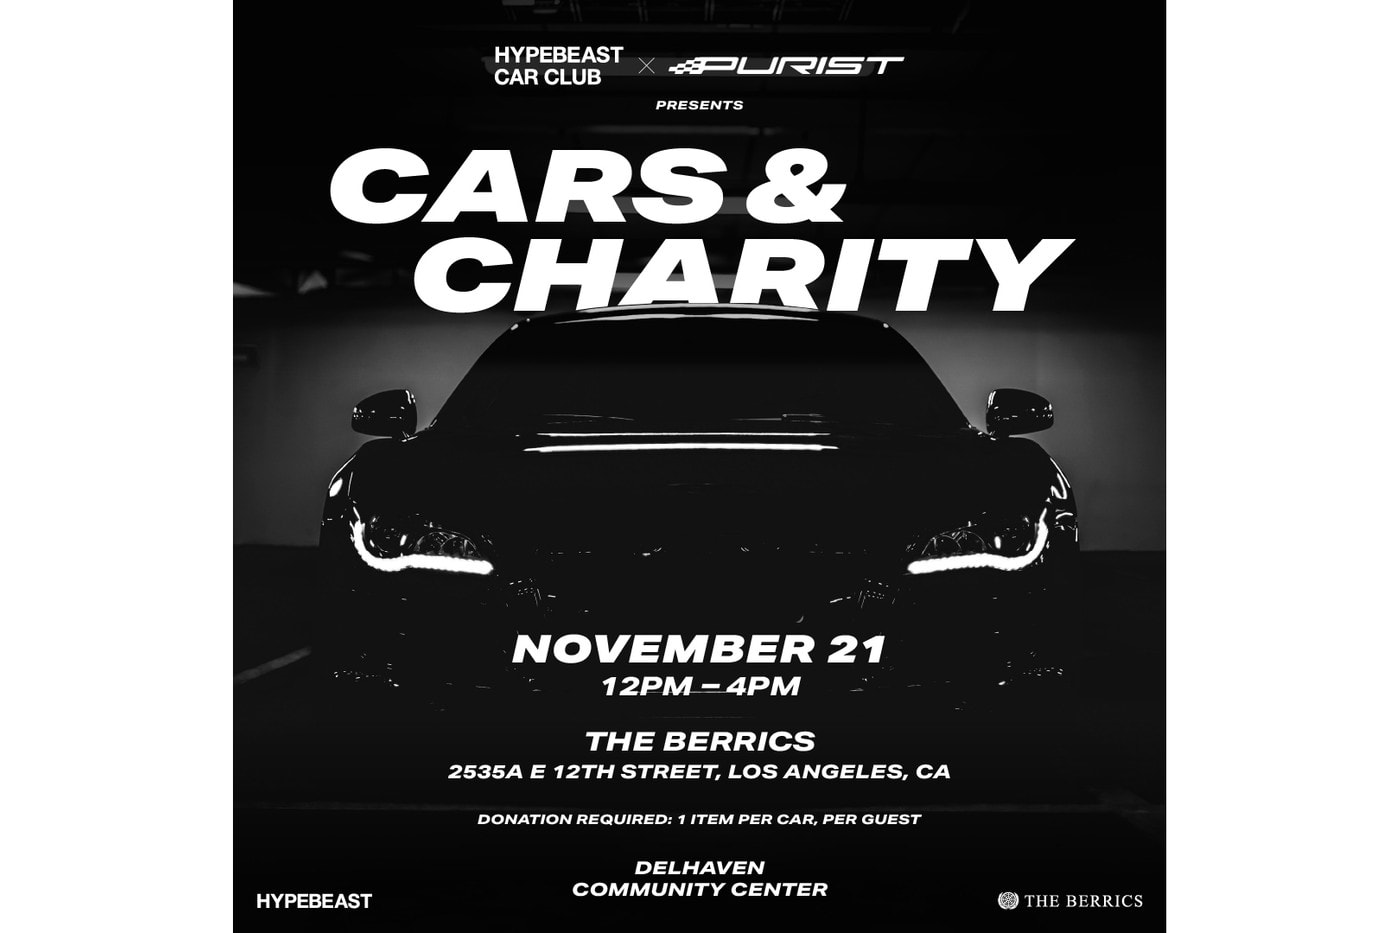 Hypebeast Car Club x Purist Group to Hold 'Cars & Charity' Event At The Berrics